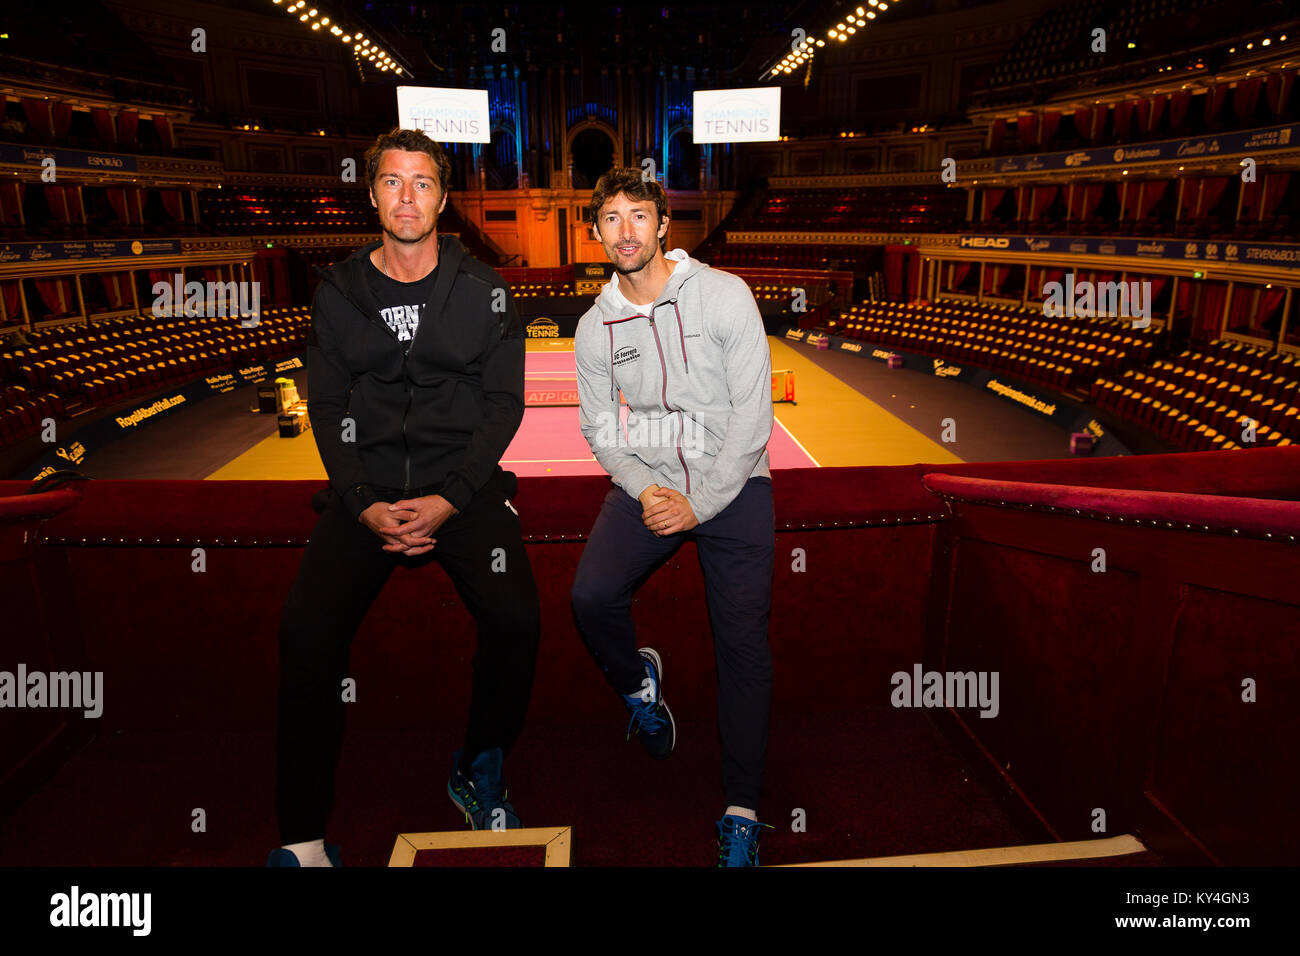 London, UK. Juan Carlos Ferrero and Marat Safin pose during a photocall to mark the launch of the Champions' Tennis tournament at the Royal Albert Hal Stock Photo